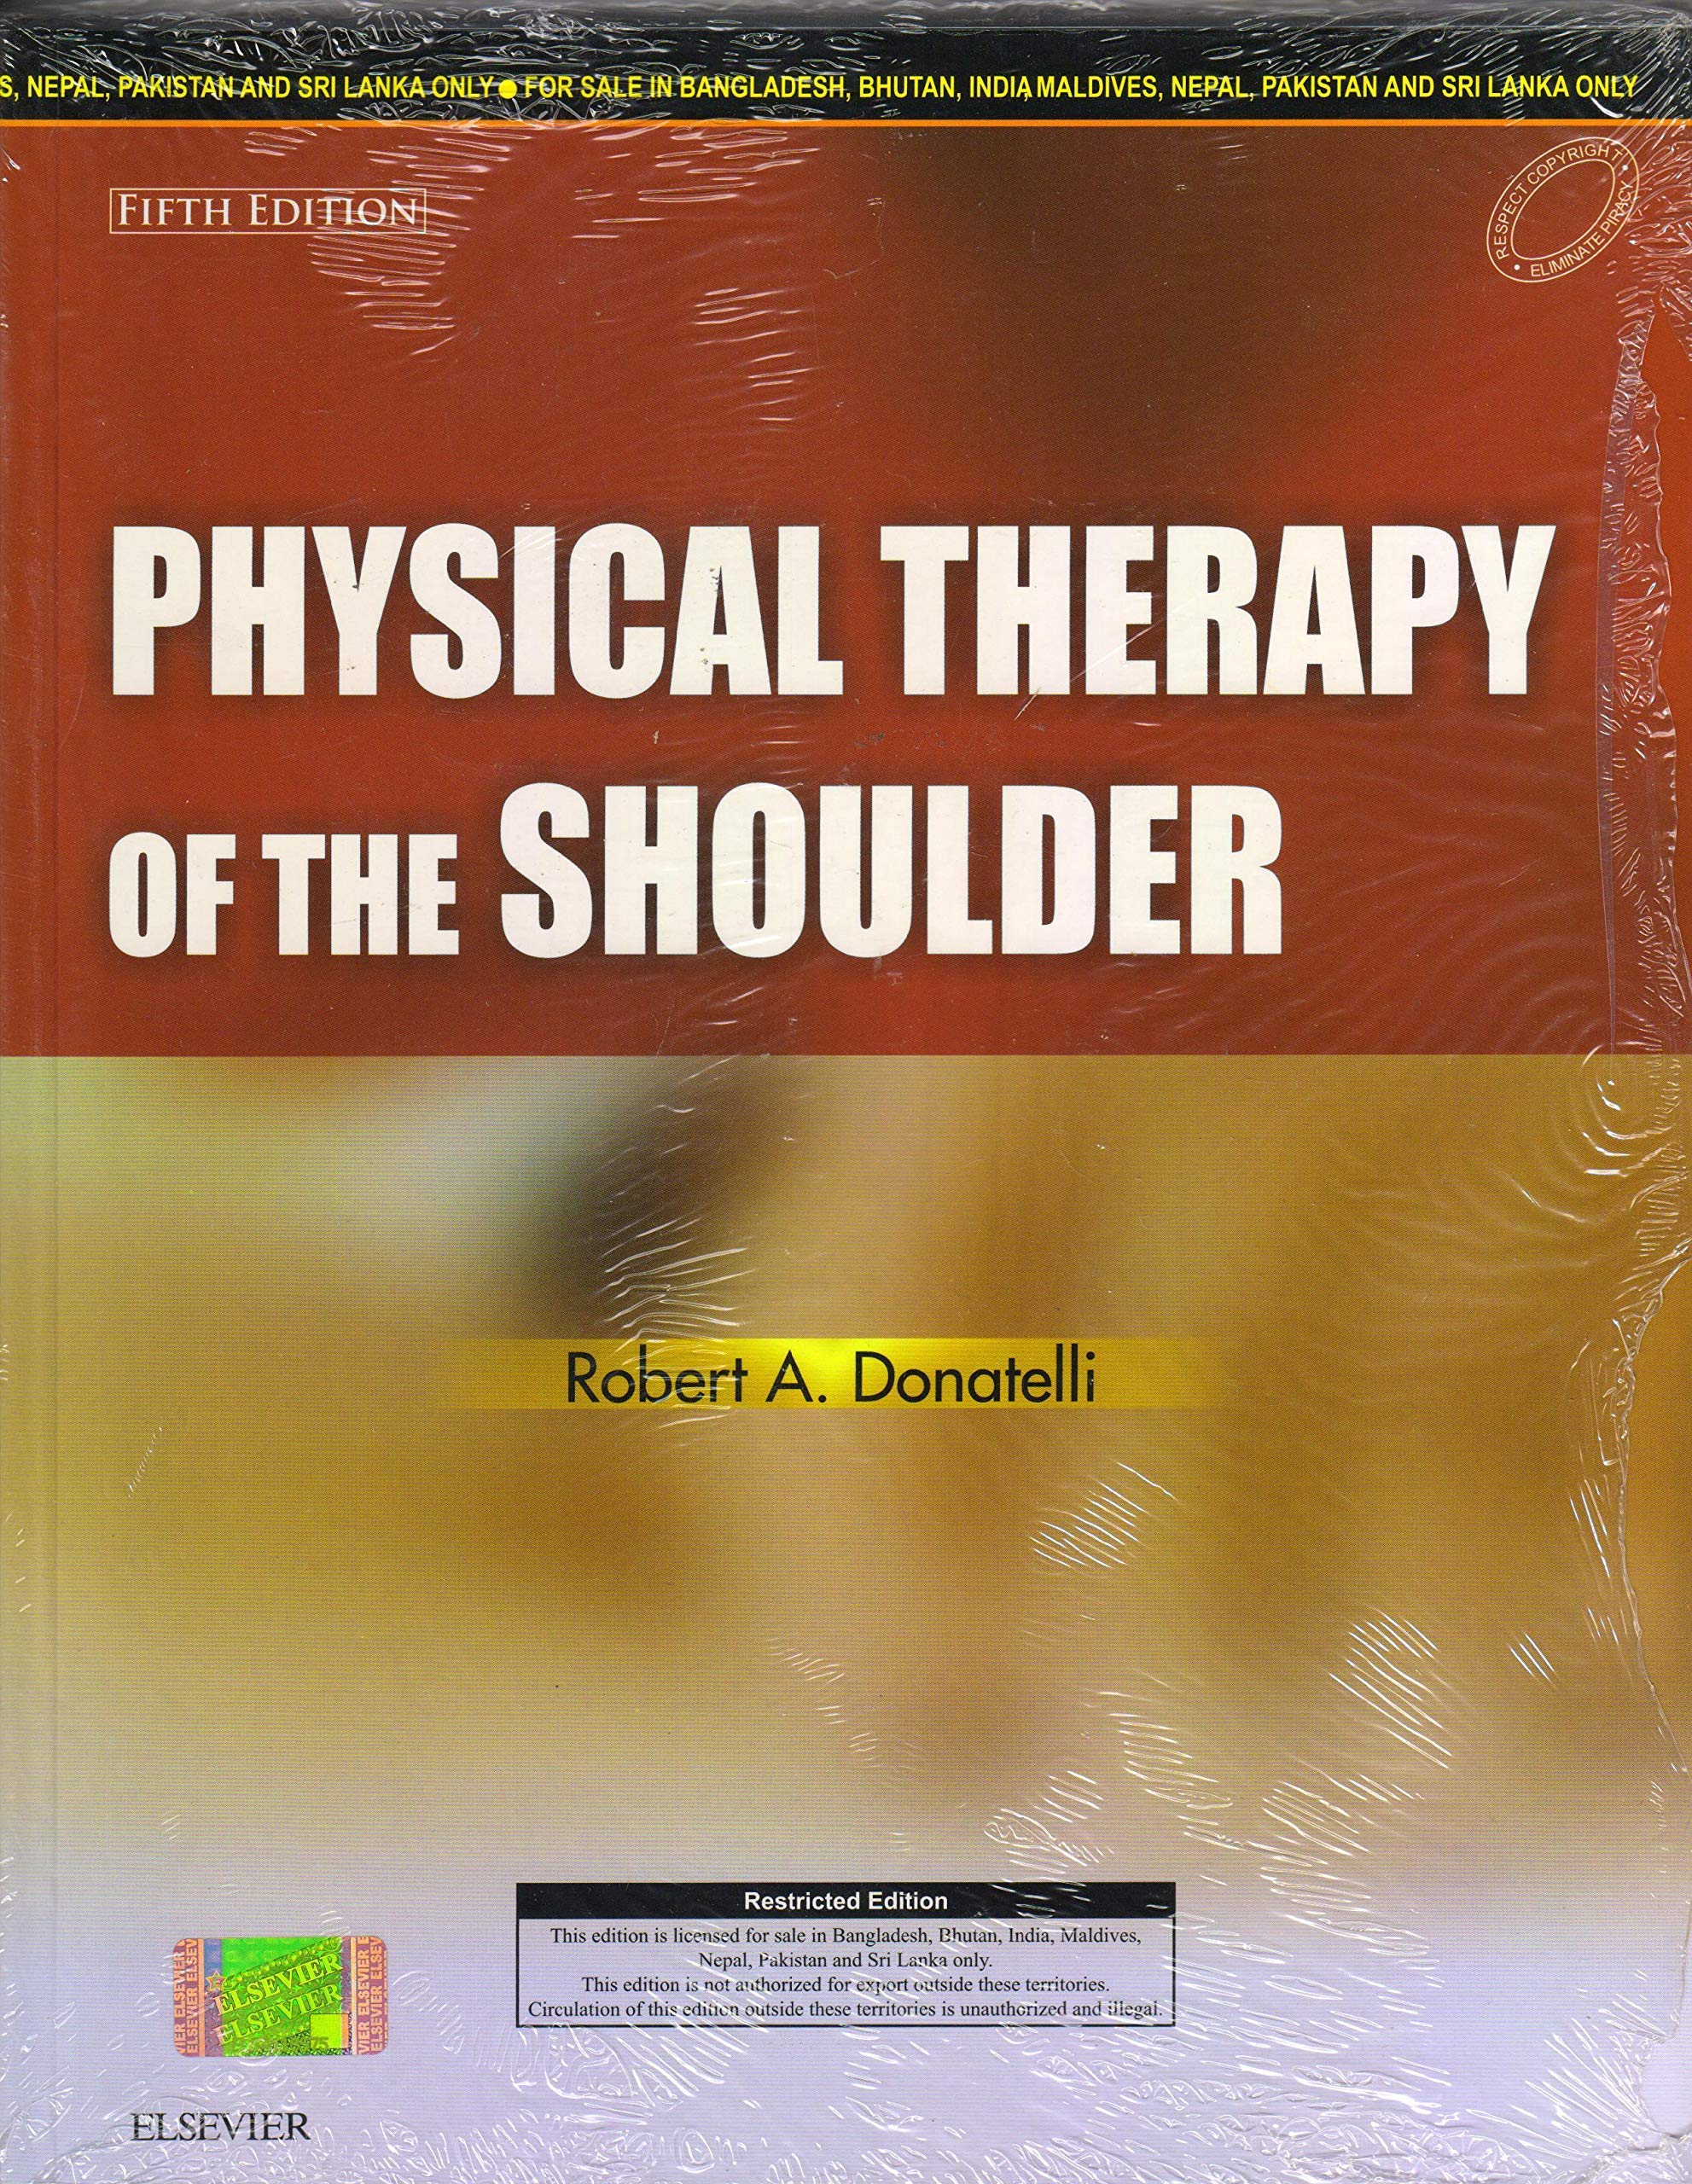 Physical Therapy Of The Shoulder, 5E